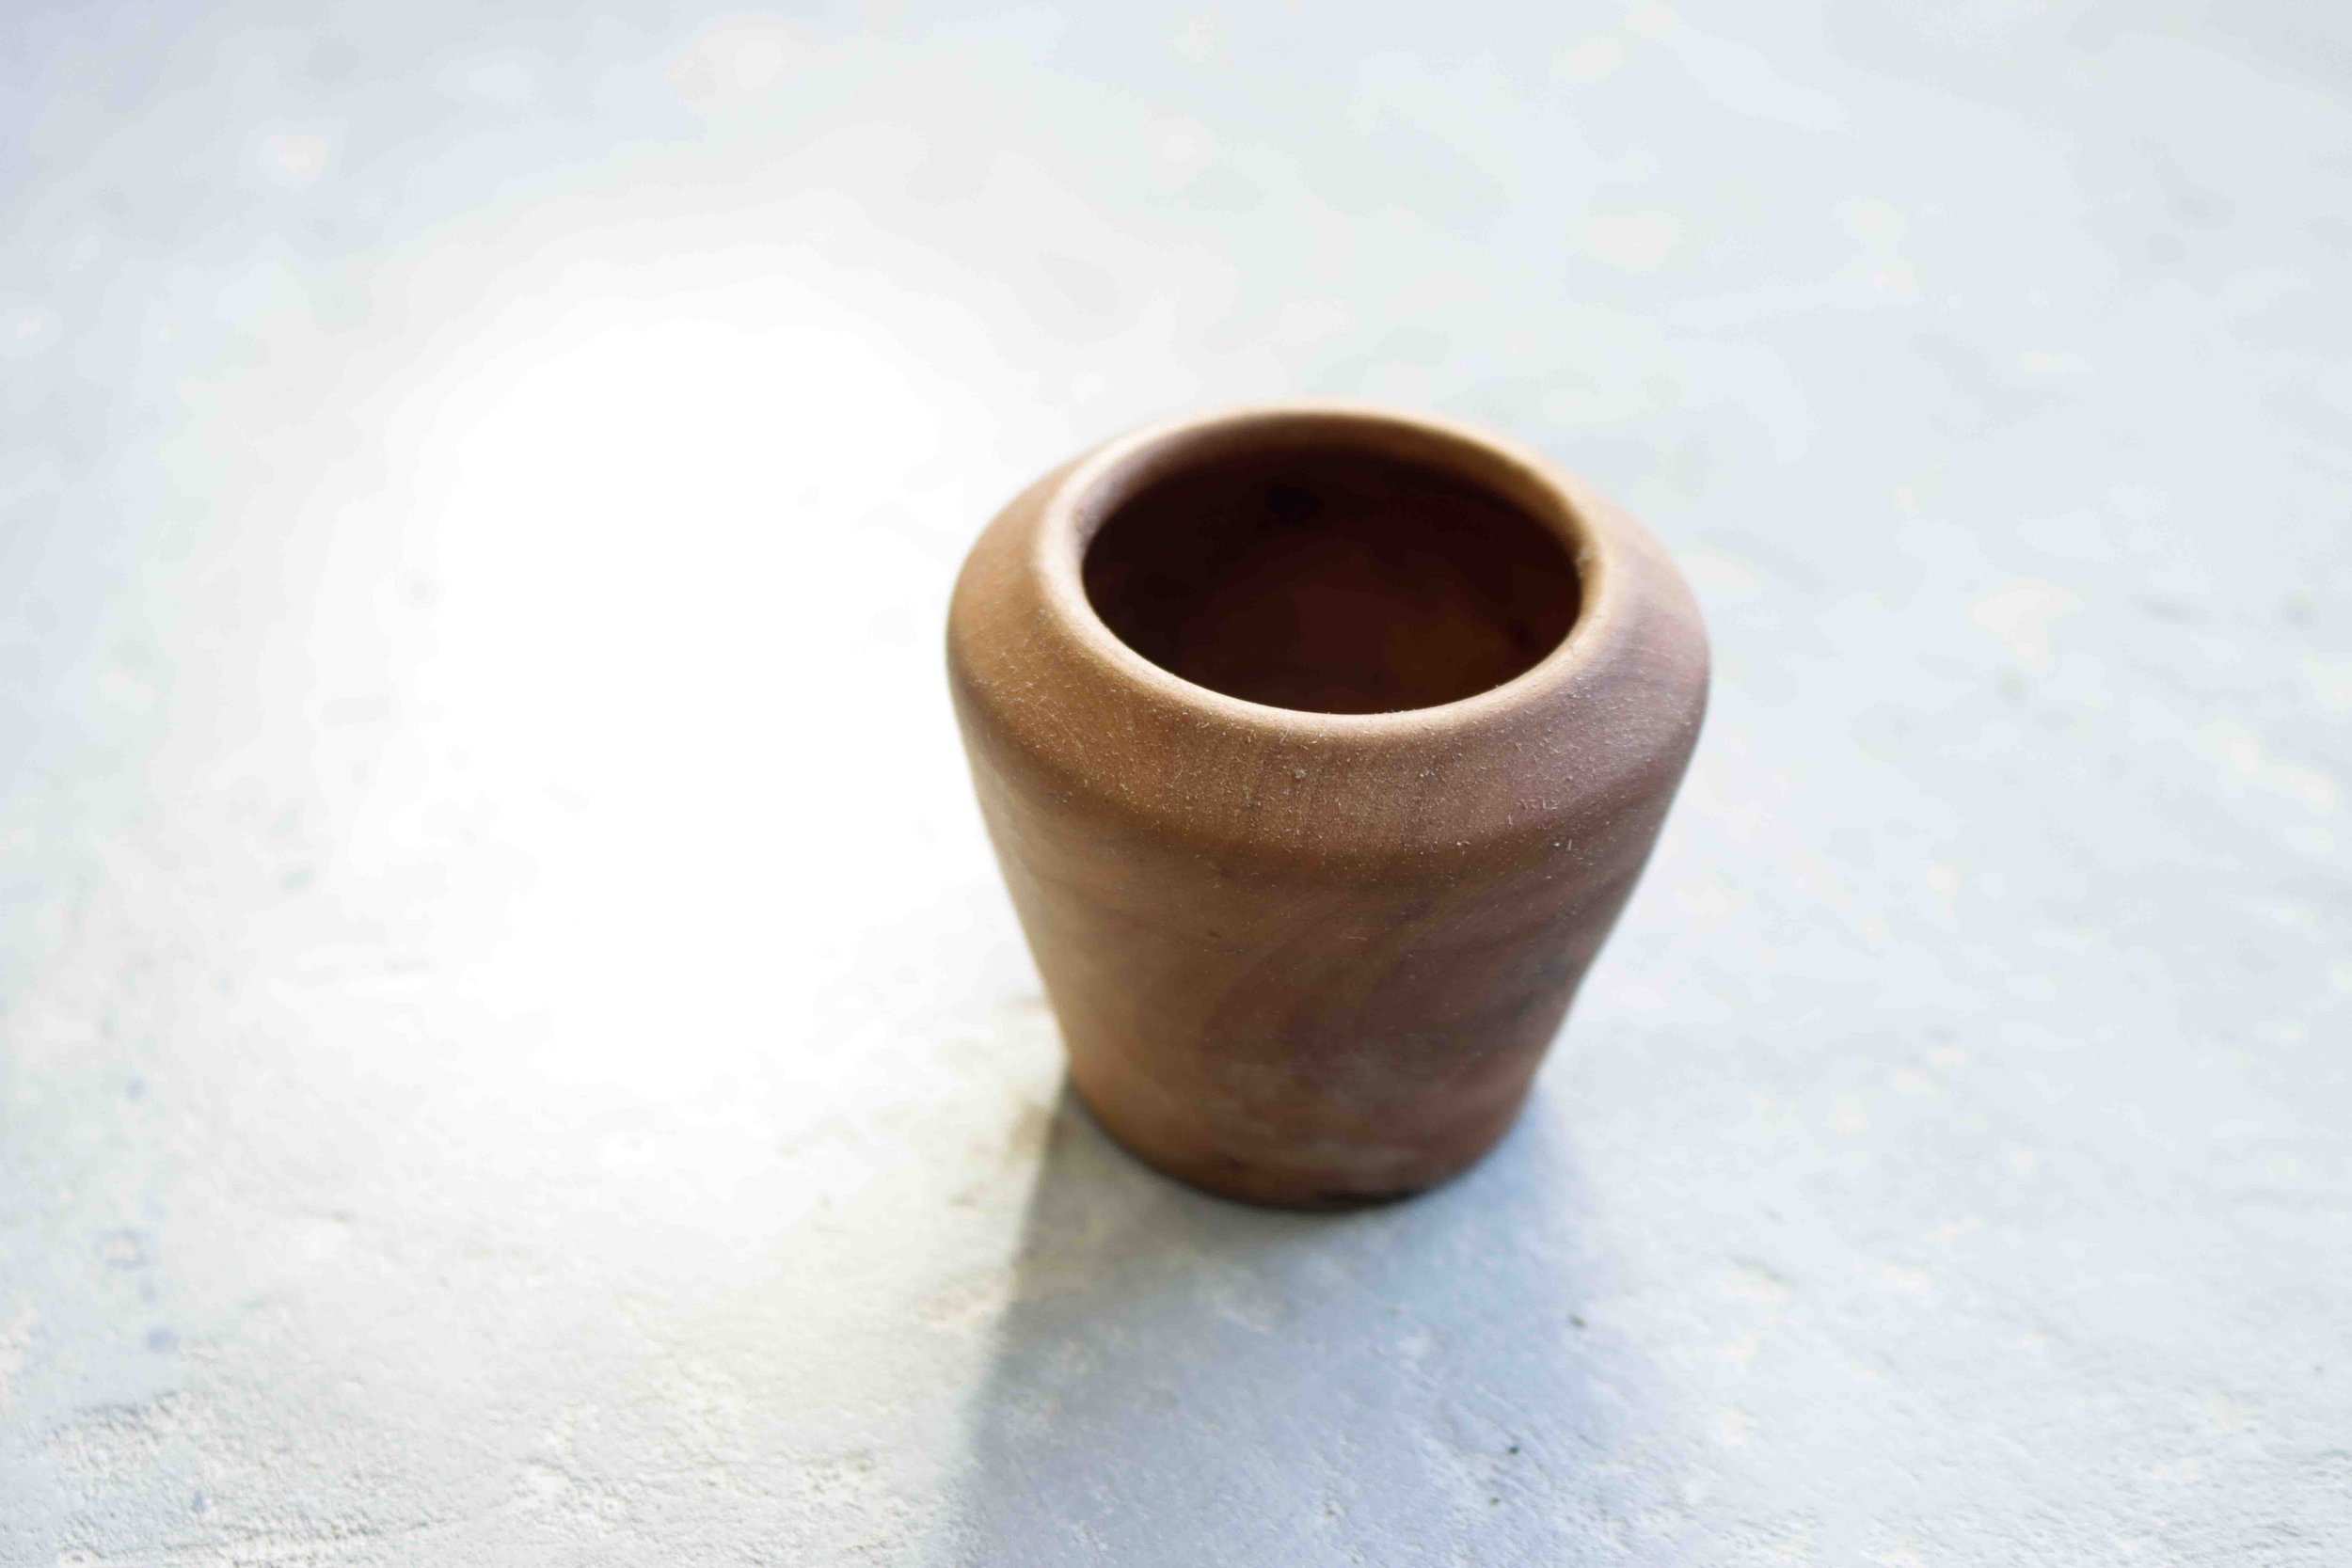 Small wooden vase turned on the lathe (Copy) (Copy) (Copy) (Copy) (Copy) (Copy) (Copy) (Copy) (Copy) (Copy)